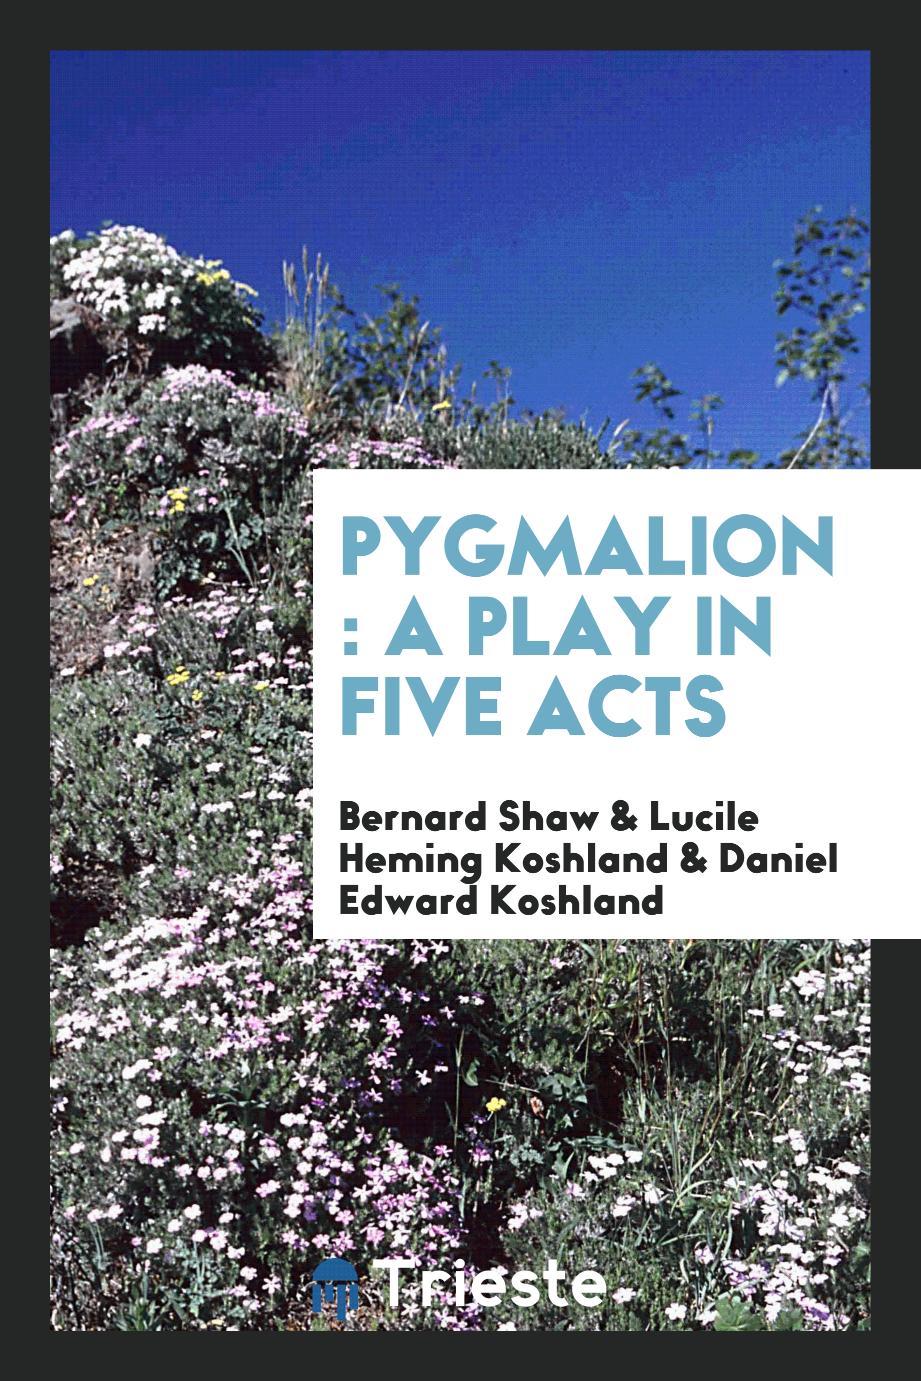 Pygmalion : a play in five acts